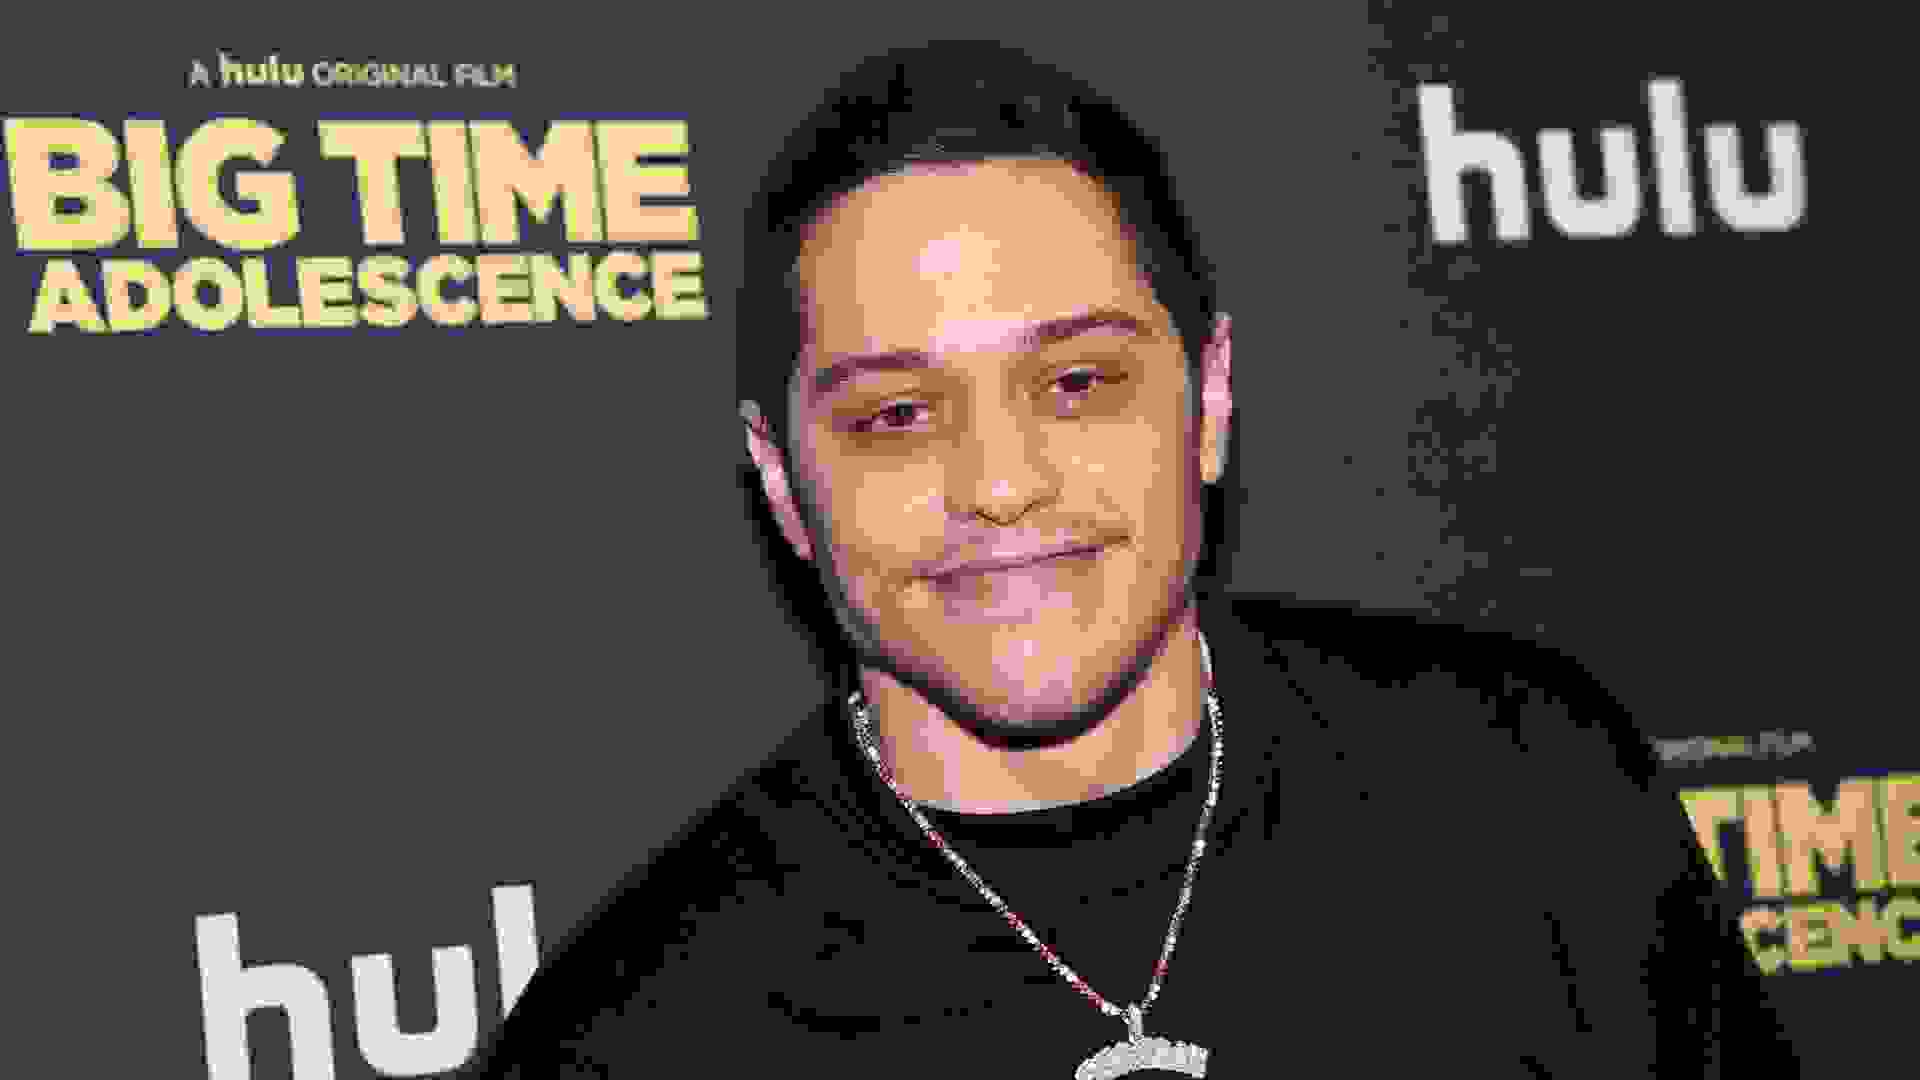 Mandatory Credit: Photo by Evan Agostini/Invision/AP/Shutterstock (10575375dq)Pete Davidson attends the premiere of "Big Time Adolescence" at Metrograph, in New YorkNY Premiere of "Big Time Adolescence", New York, USA - 05 Mar 2020.